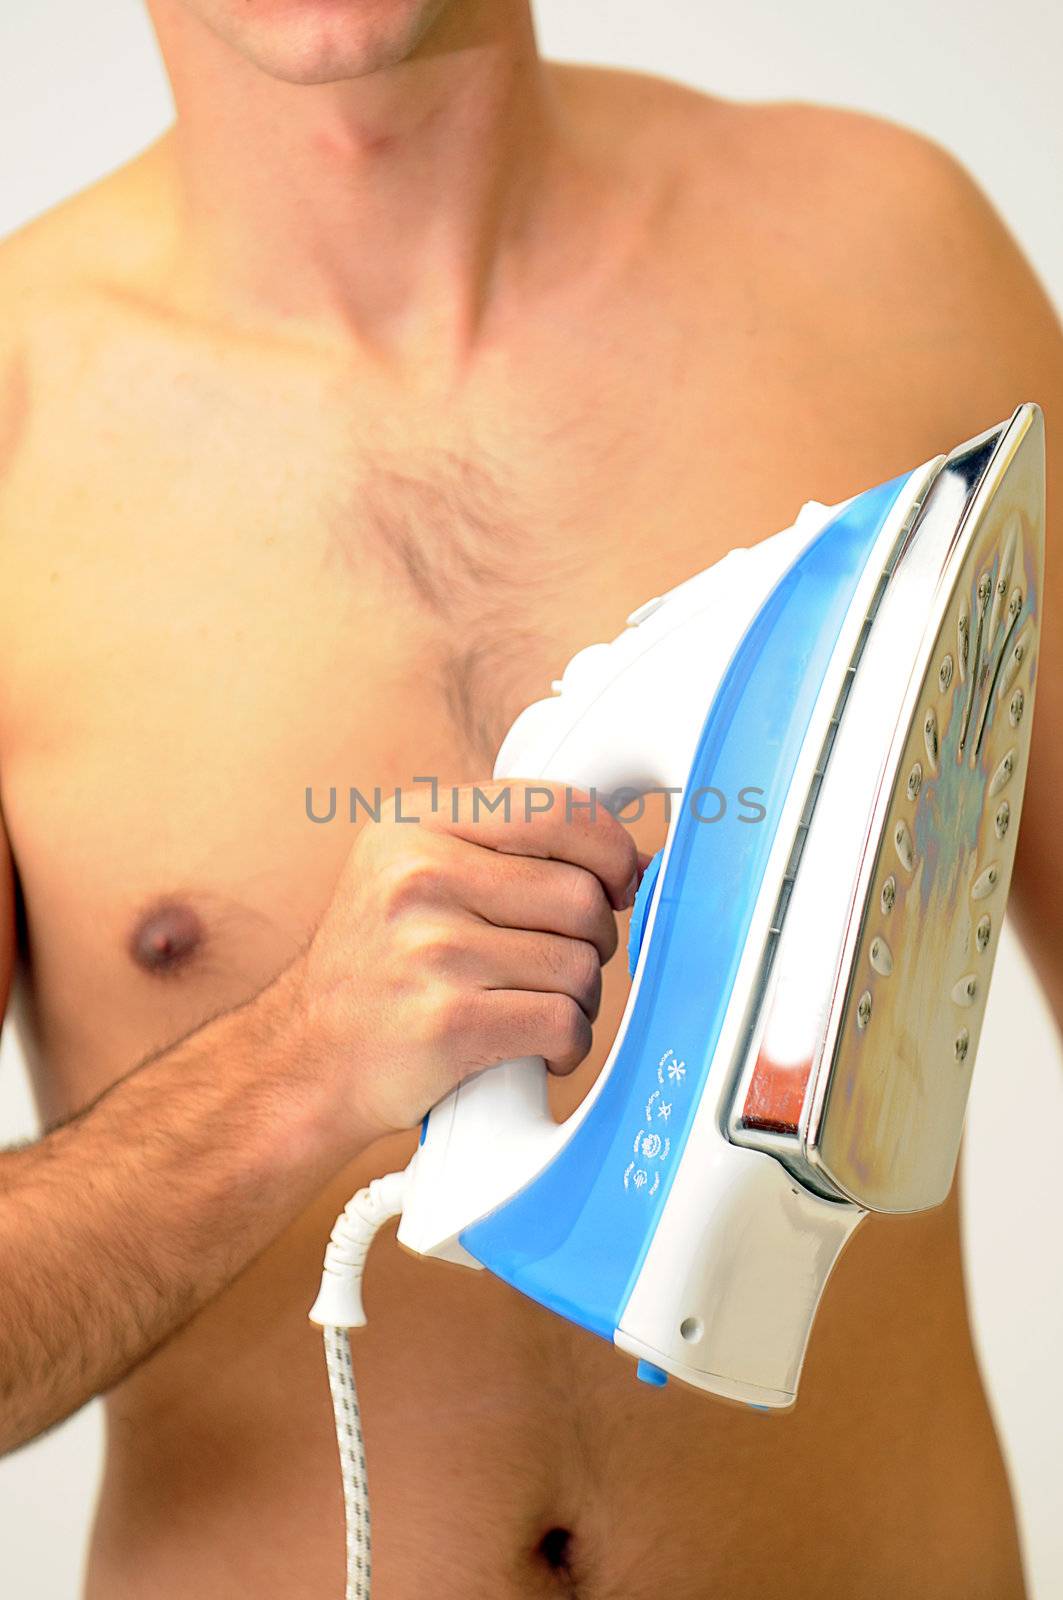 naked man holding a blue and white clothing iron in front of hairy chest